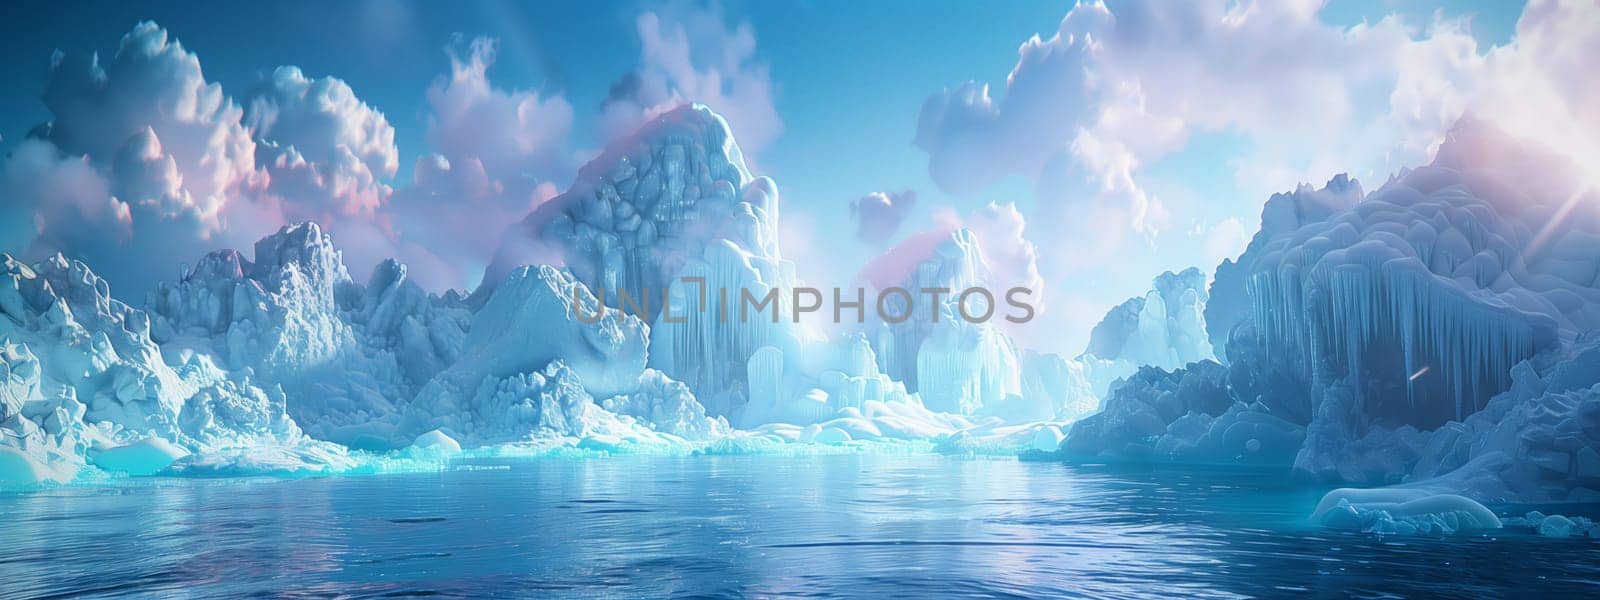 Frozen lake with snowy peaks, icebergs, and electric blue sky by richwolf